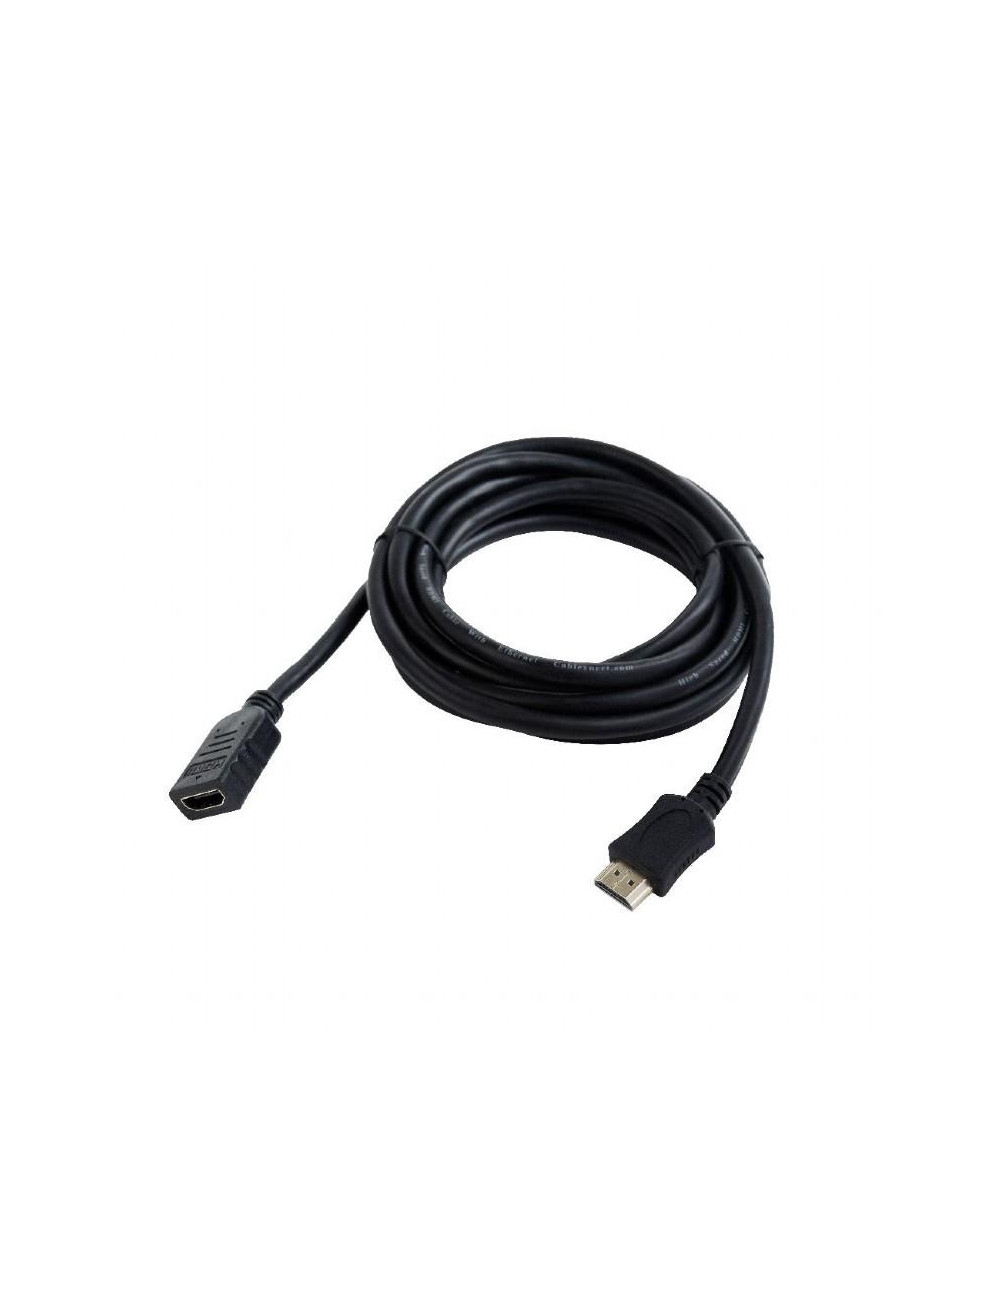 CABLE HDMI EXTENSION 0.5M/CC-HDMI4X-0.5M GEMBIRD